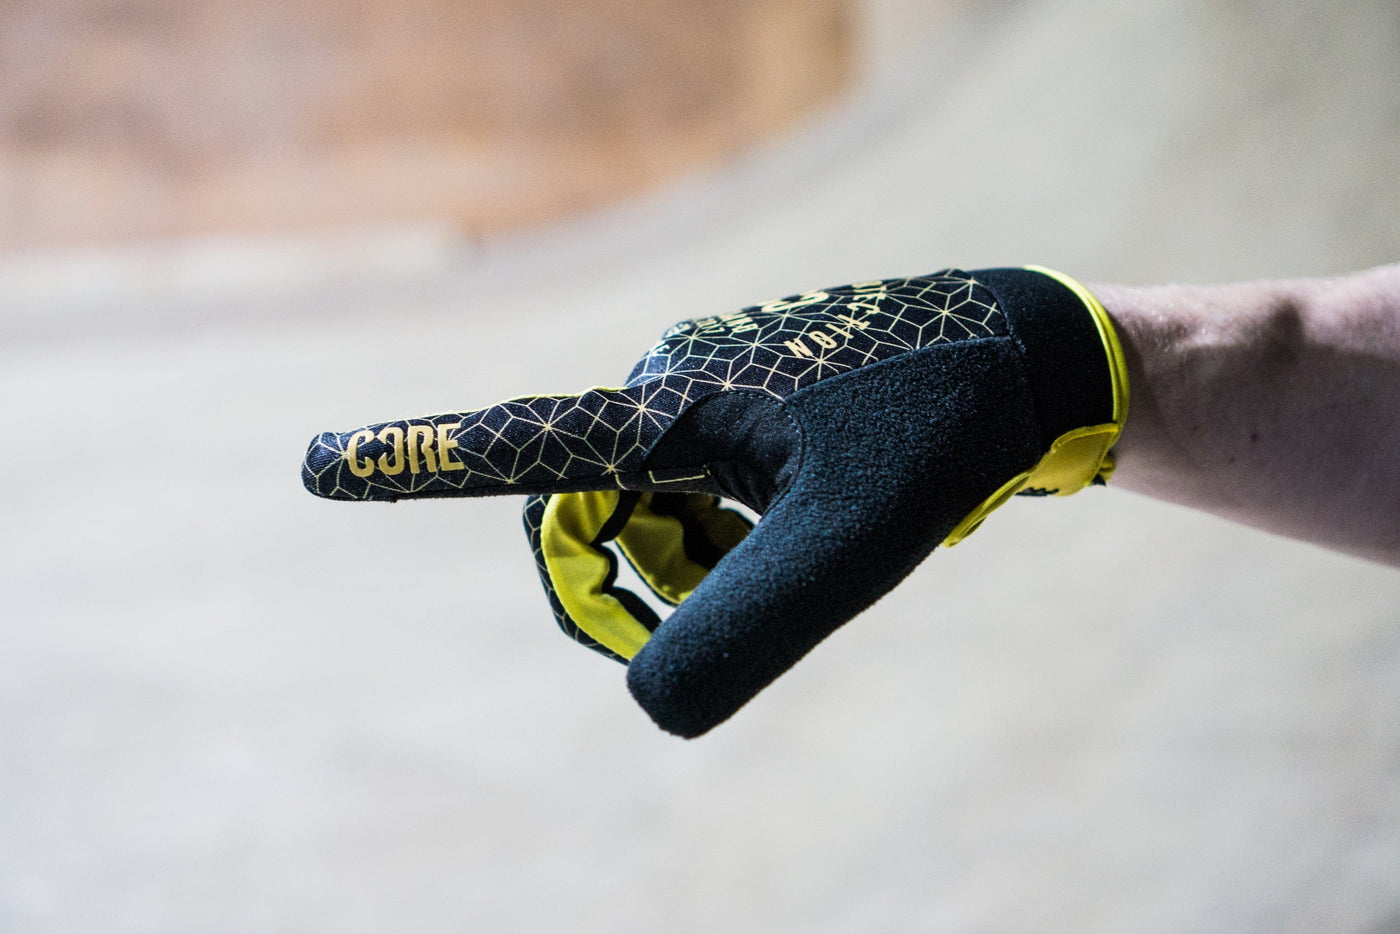 CORE Protection BMX Gloves SR Black Gold Geo I Bike Gloves Products on Point